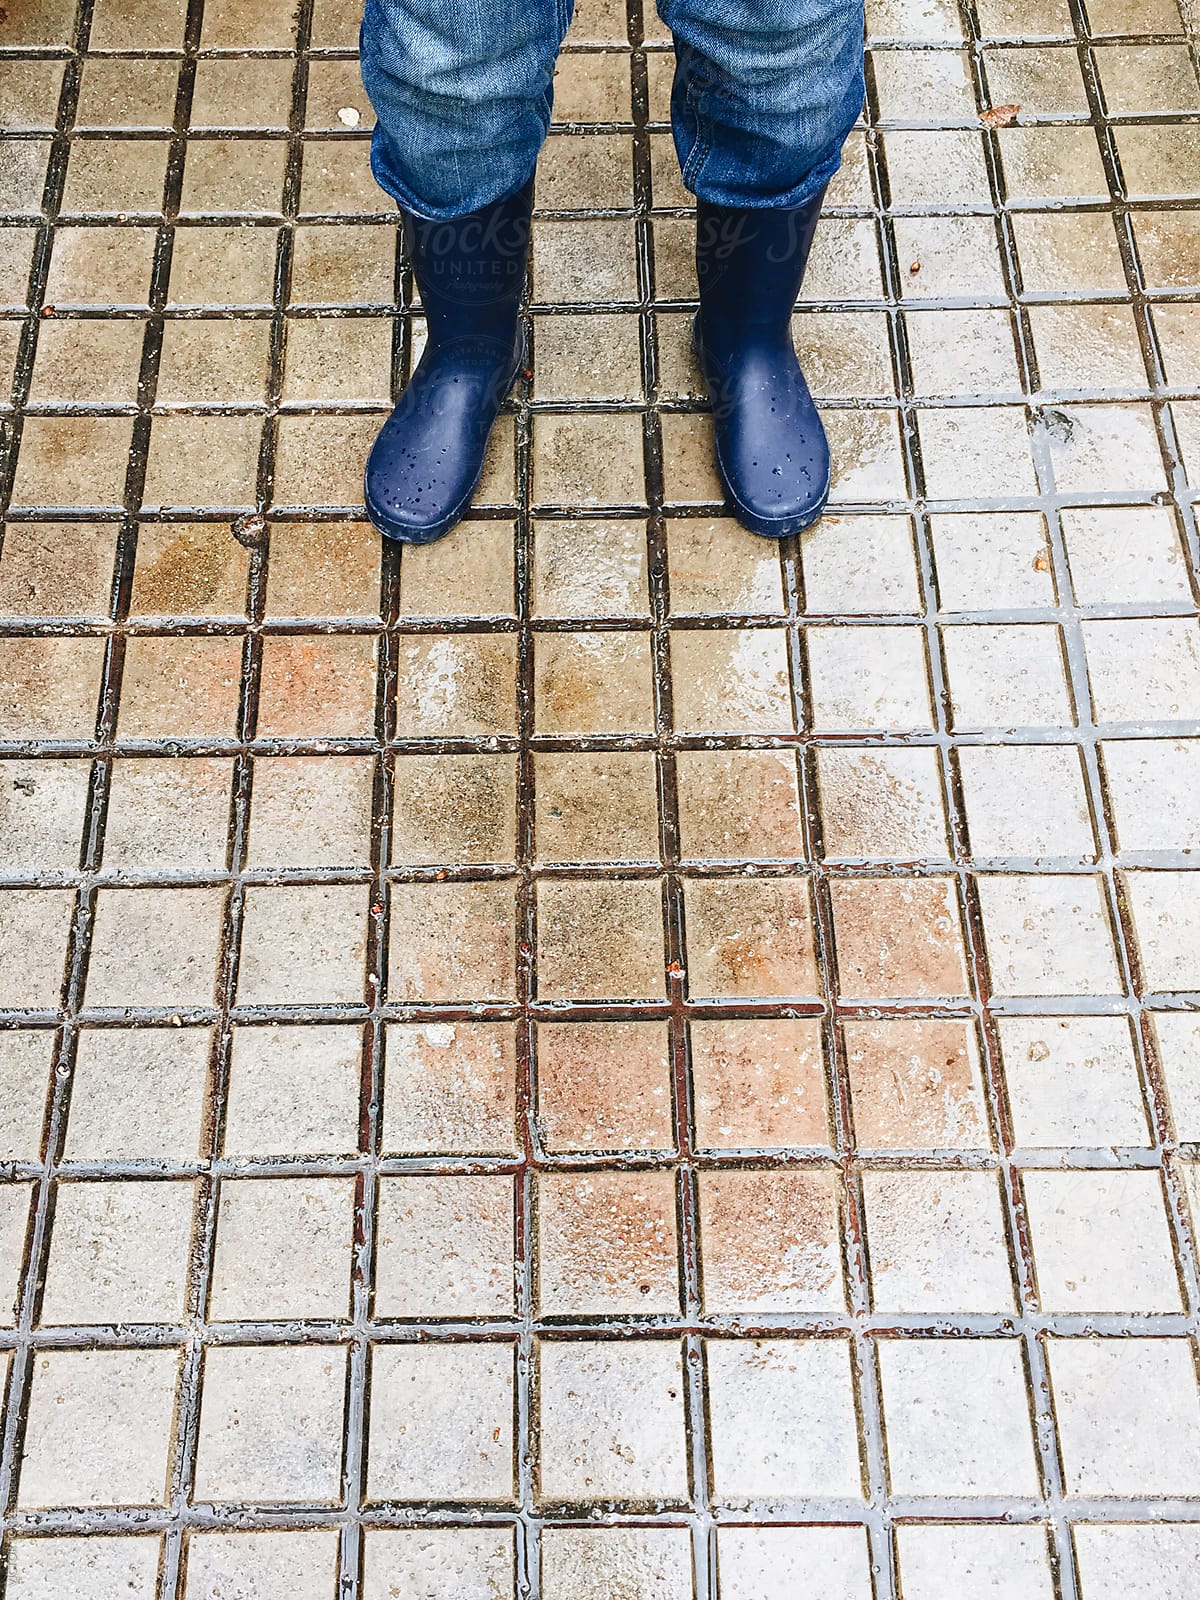 Kid with Water Boots on a Wet Floor